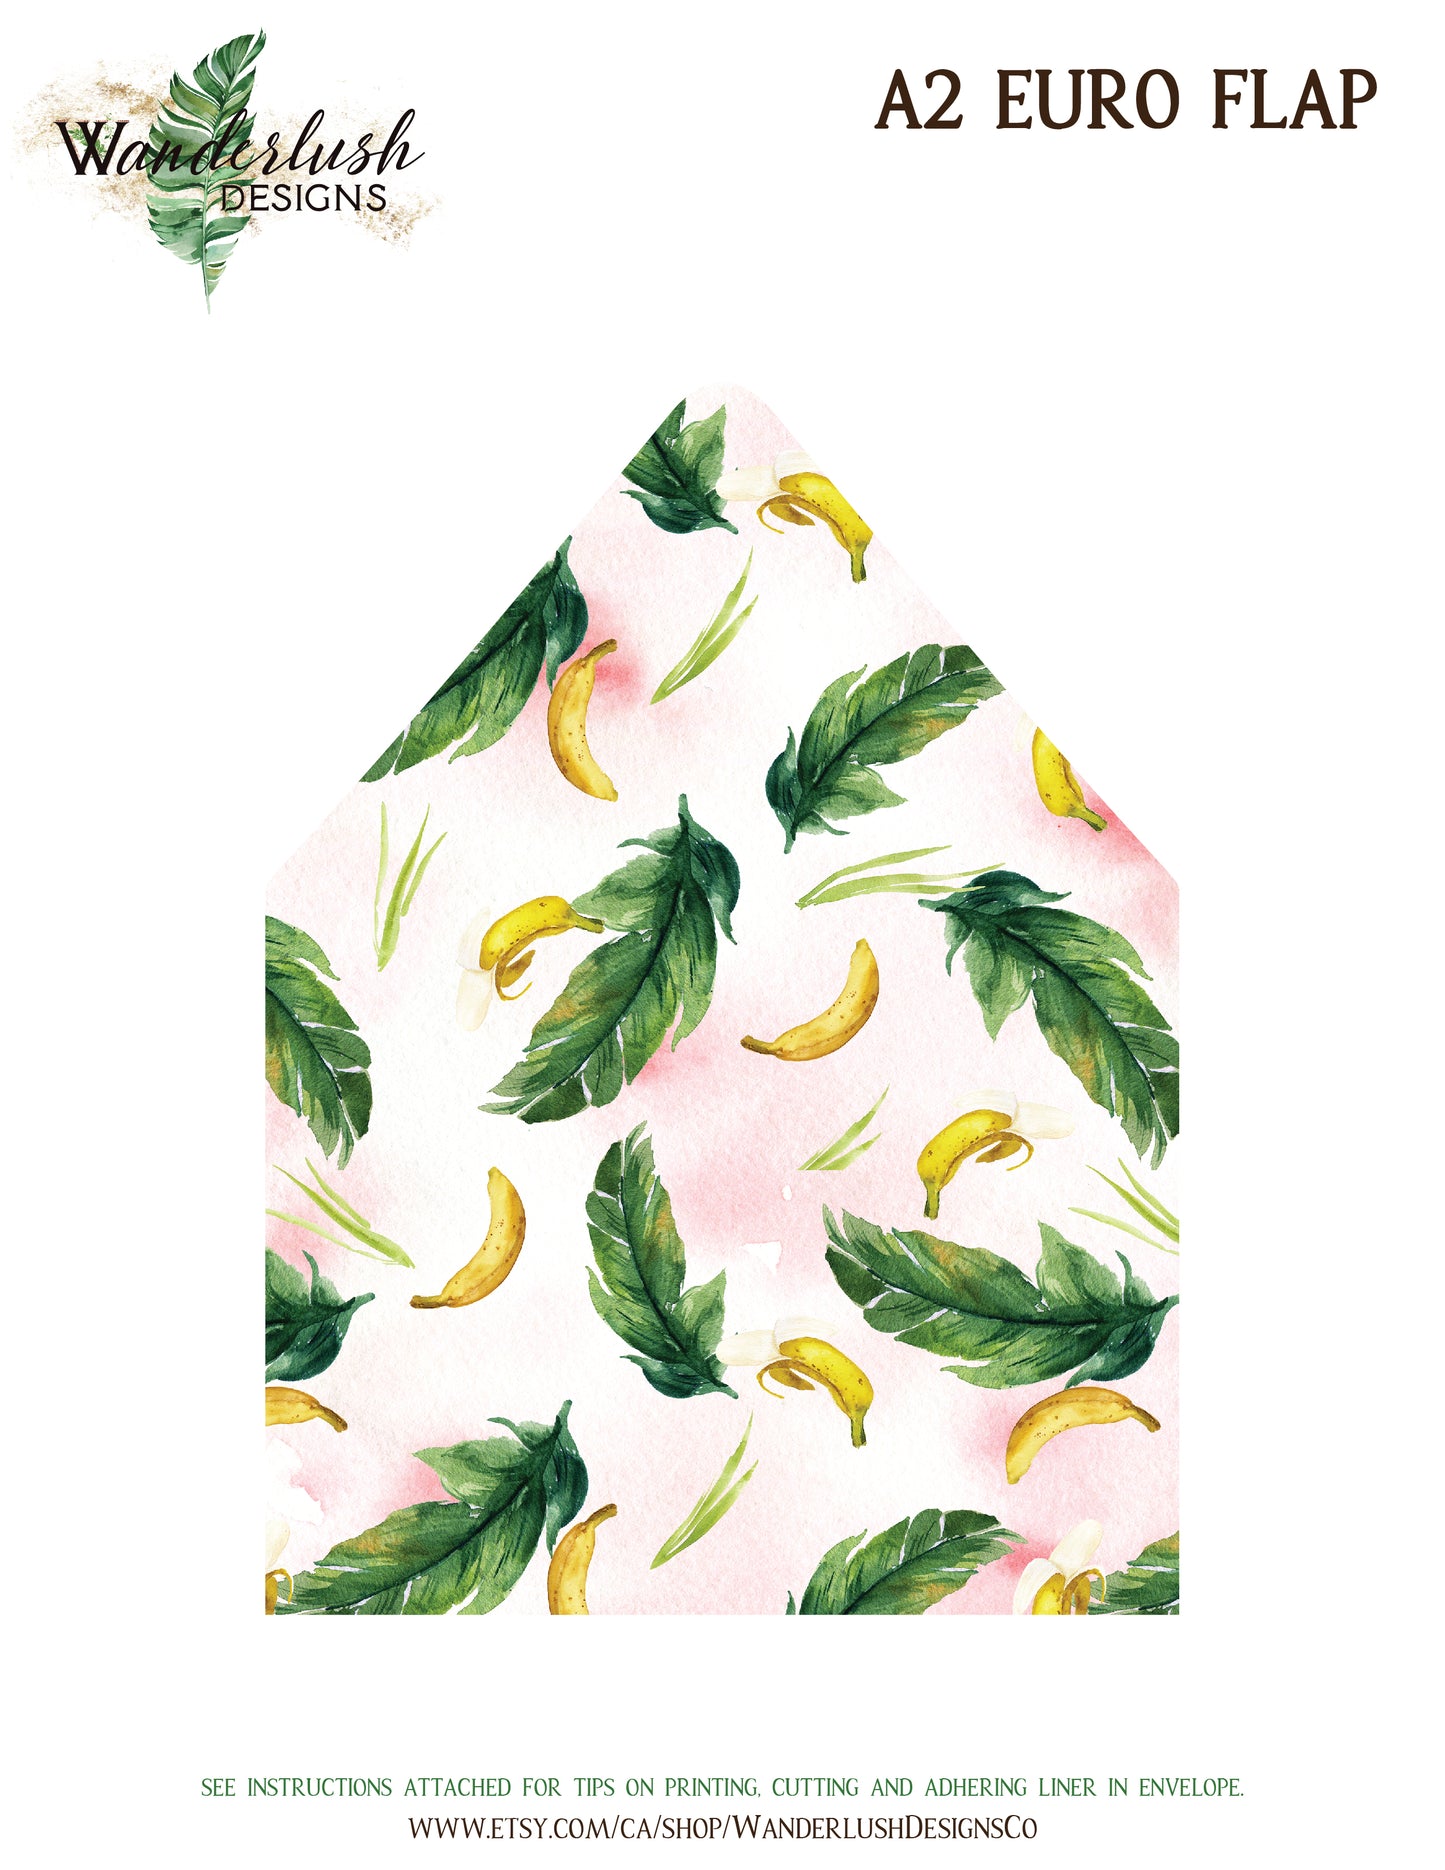 Tropical Floral Watercolor A7 & A2 Euro Flap Envelope Liners 4 Digital "Instant Download" - 'TROPICAL LUSH"